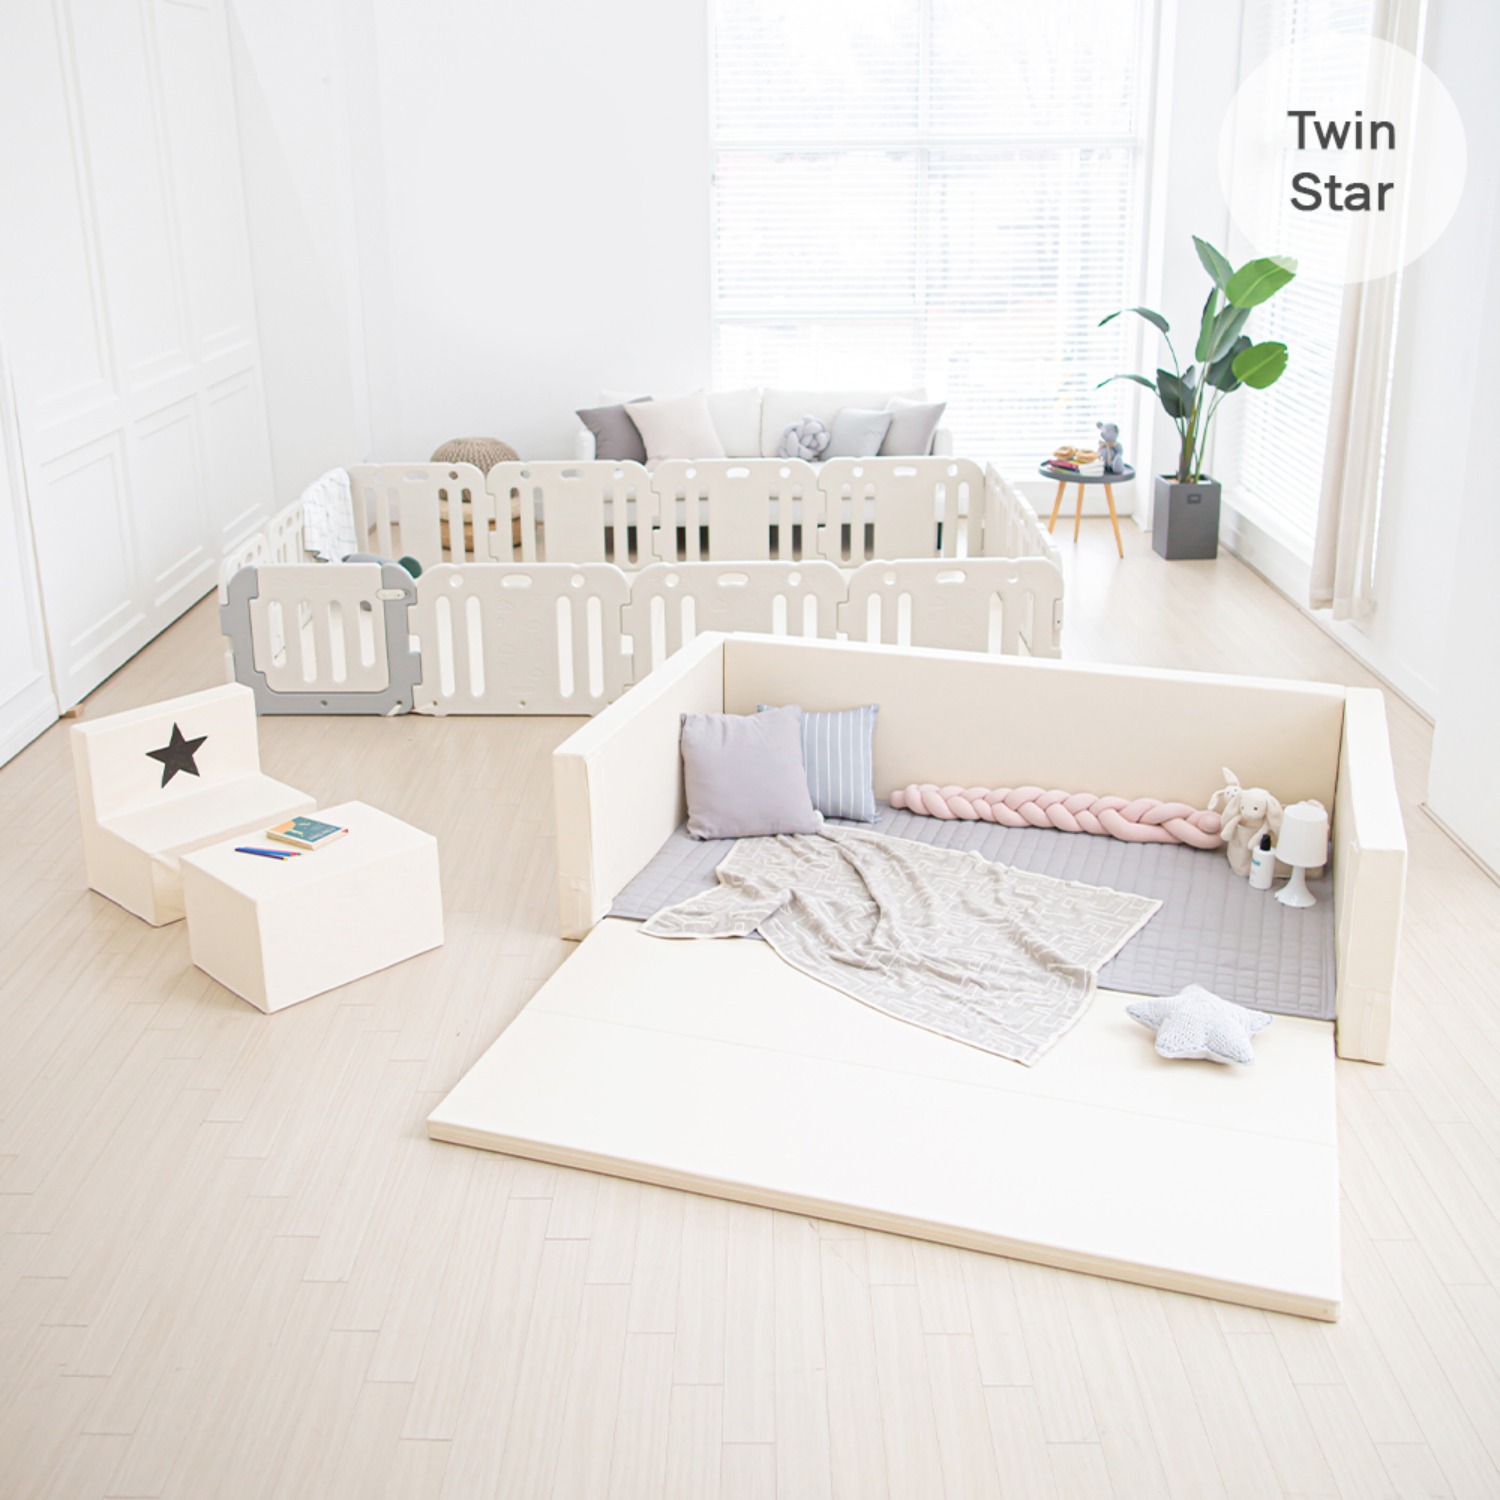 twin star clean bumper bed giant extra large full set